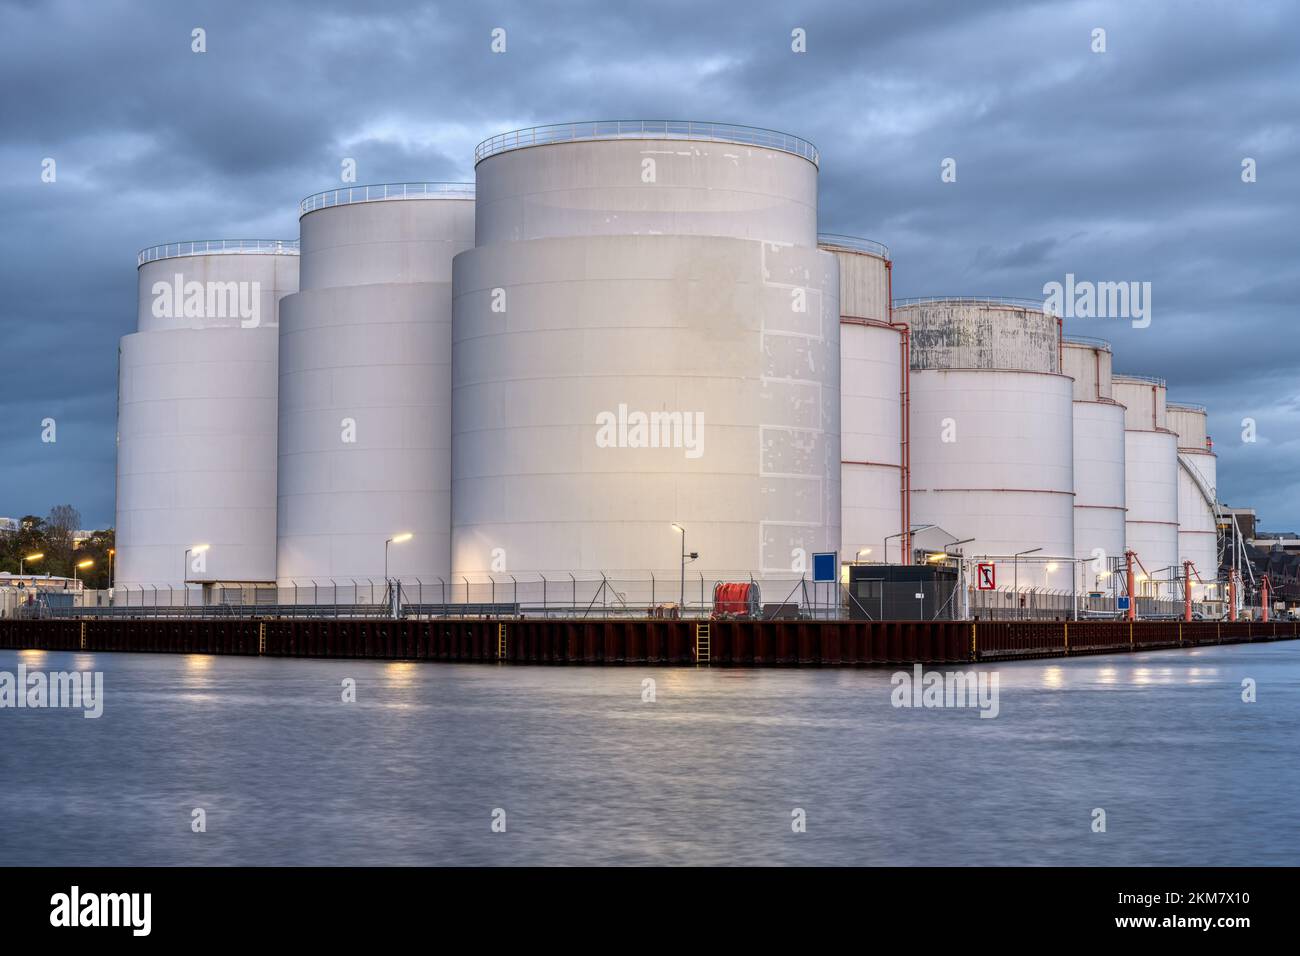 Storage tanks for fossil fuels at dusk seen in Berlin Stock Photo